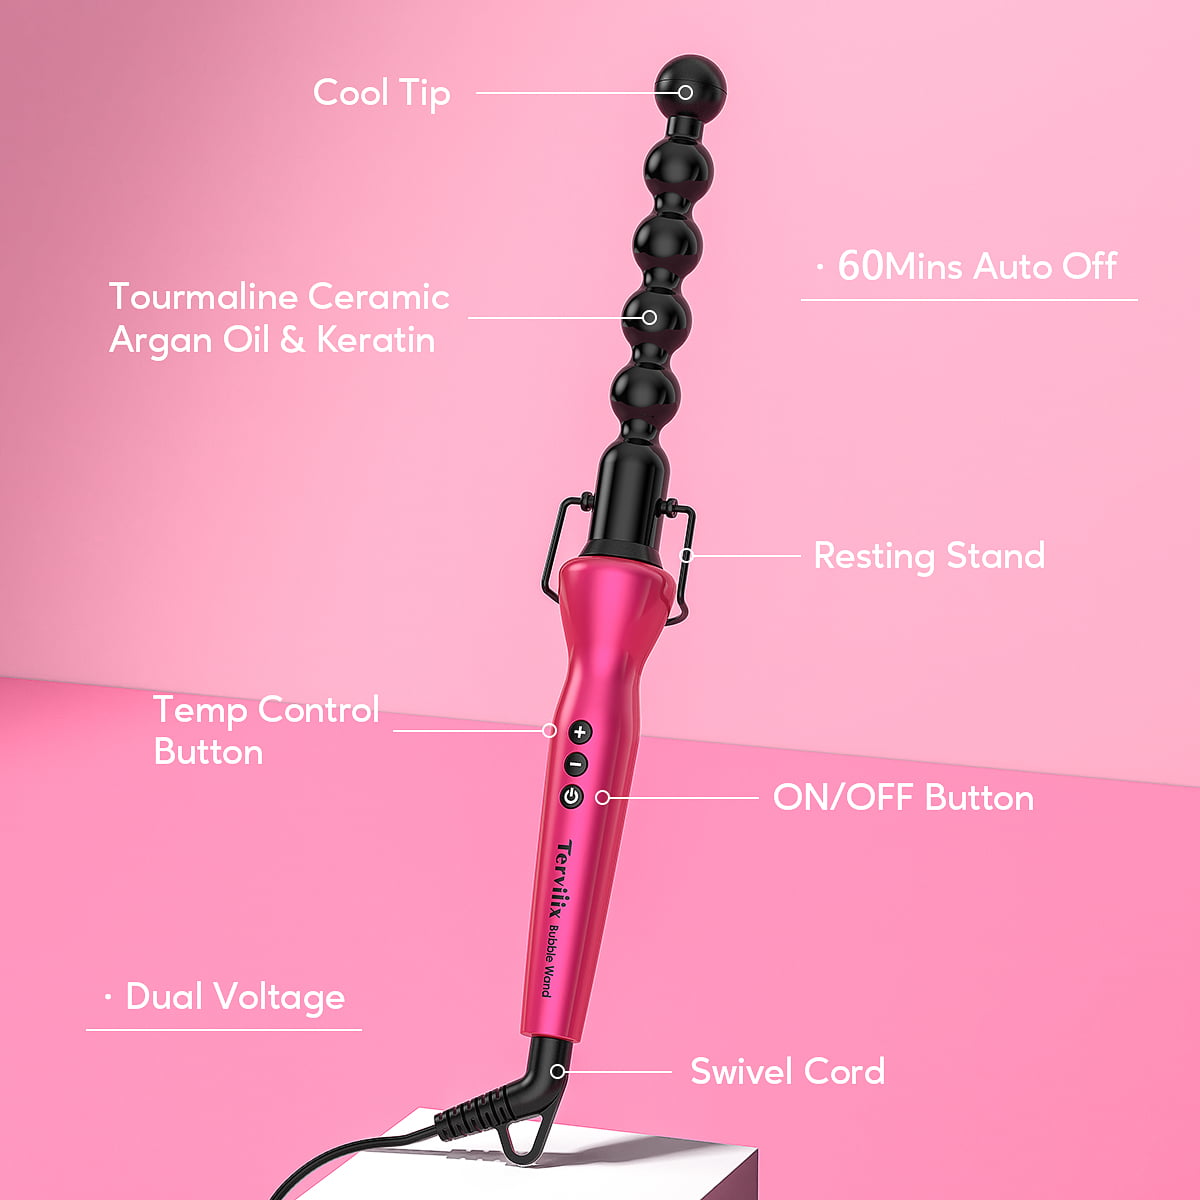 Pearl Barrel Curling Wand | Bubble Wand Curling Iron | NuMe